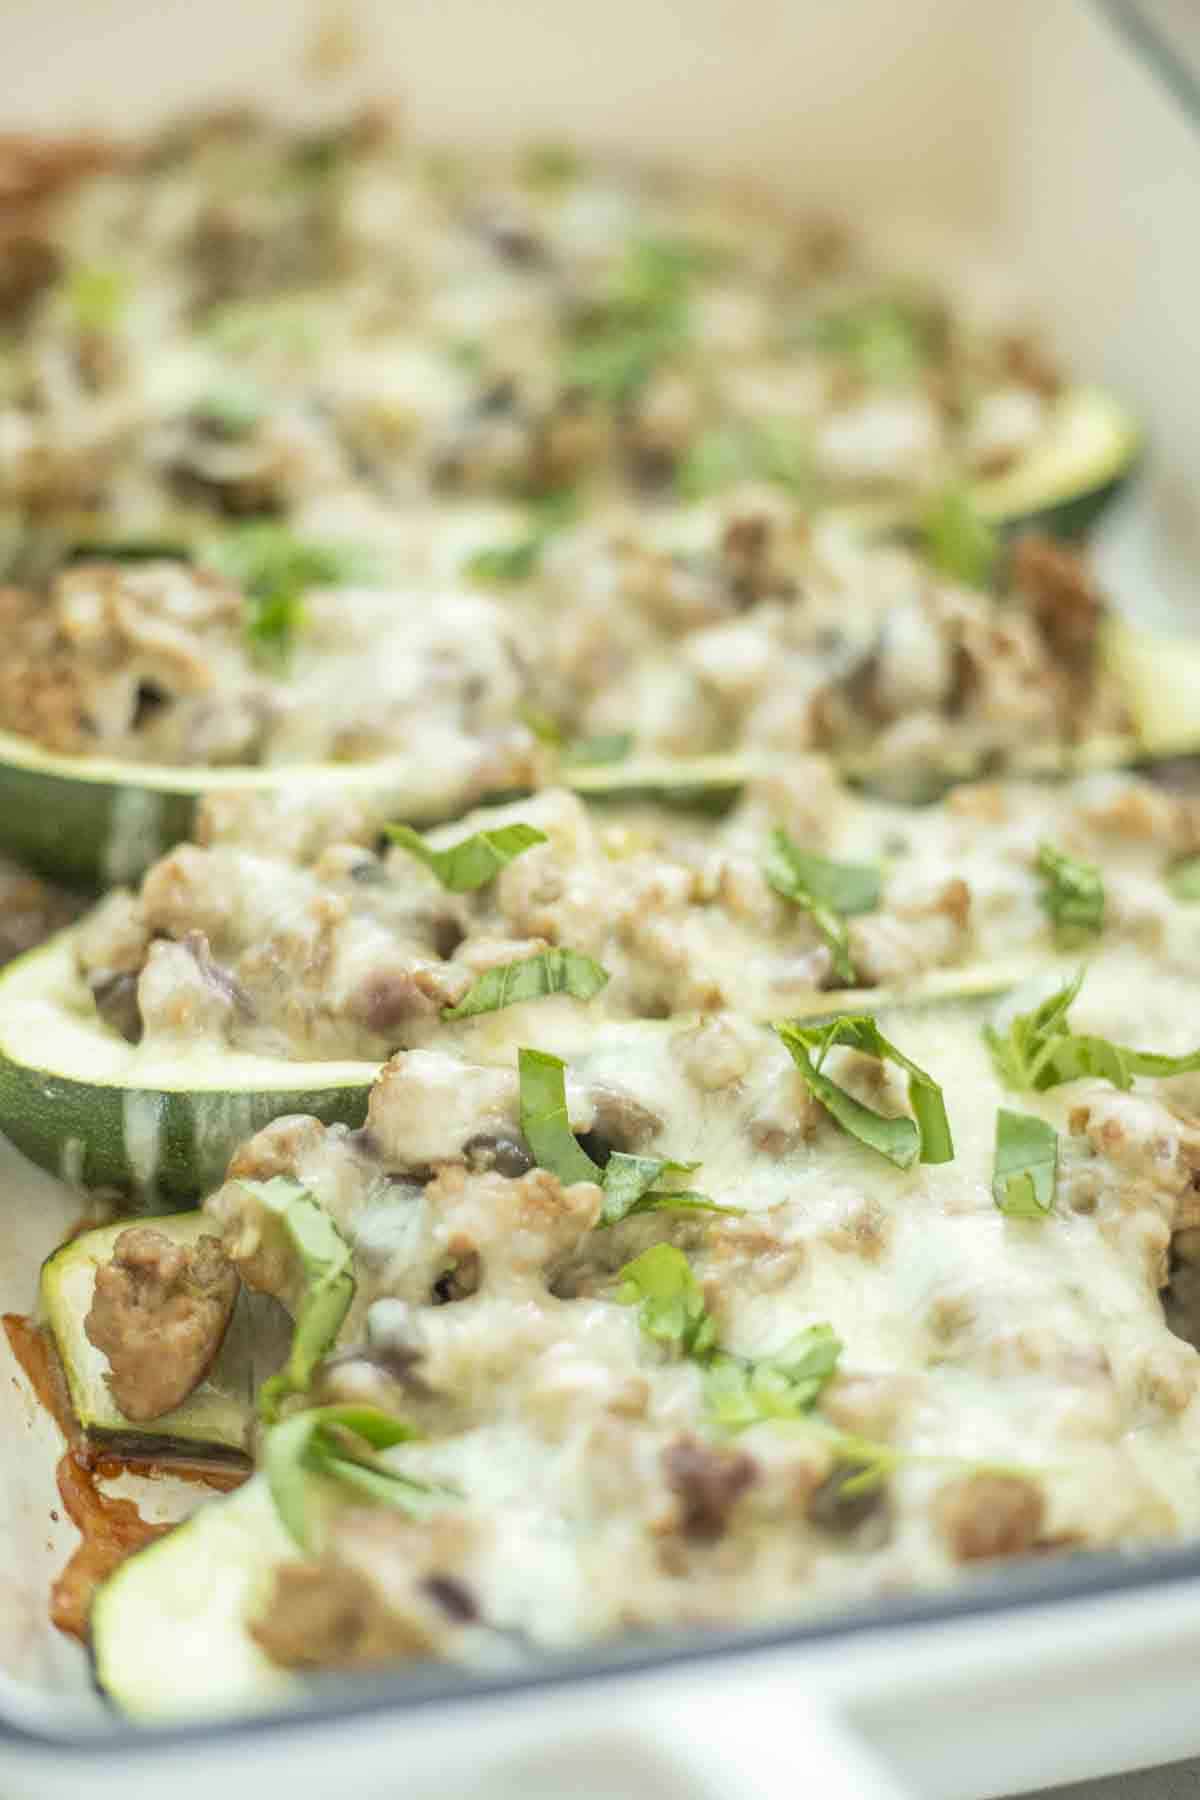 Sausage stuffed zucchini boats topped with cheese and fresh herbs in a white baking dish.